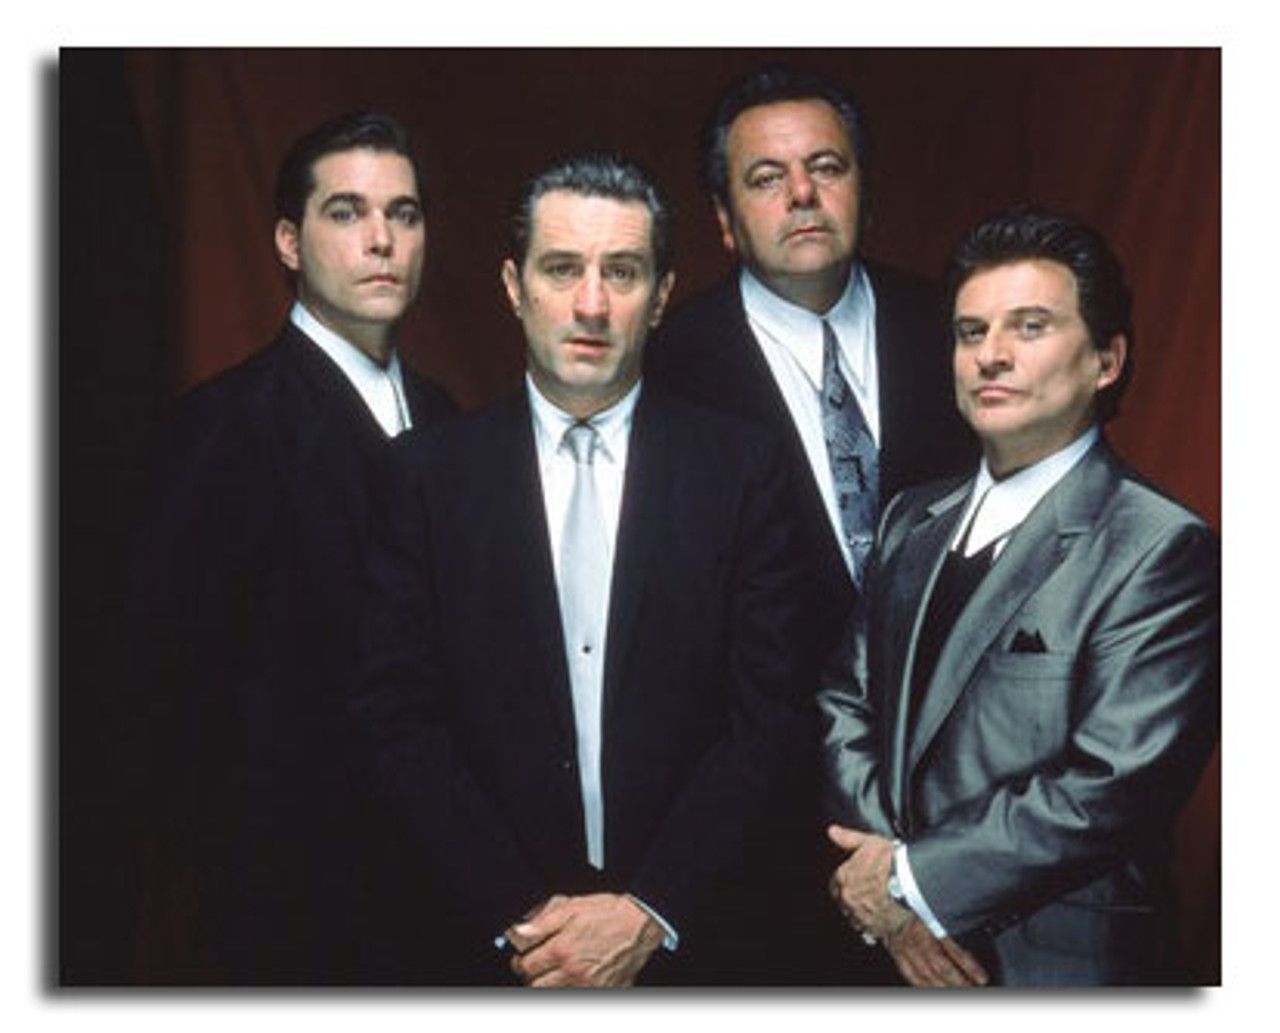 ss3596320_-_photograph_of_ray_liotta_as_henry_hill_joe_pesci_as_tommy_devito_paul_sorvino_as_paul_cicero_from_goodfellas_available_in_4_sizes_framed_or_unframed_buy_now_at_starstills__83735__42876.1394505488.jpg